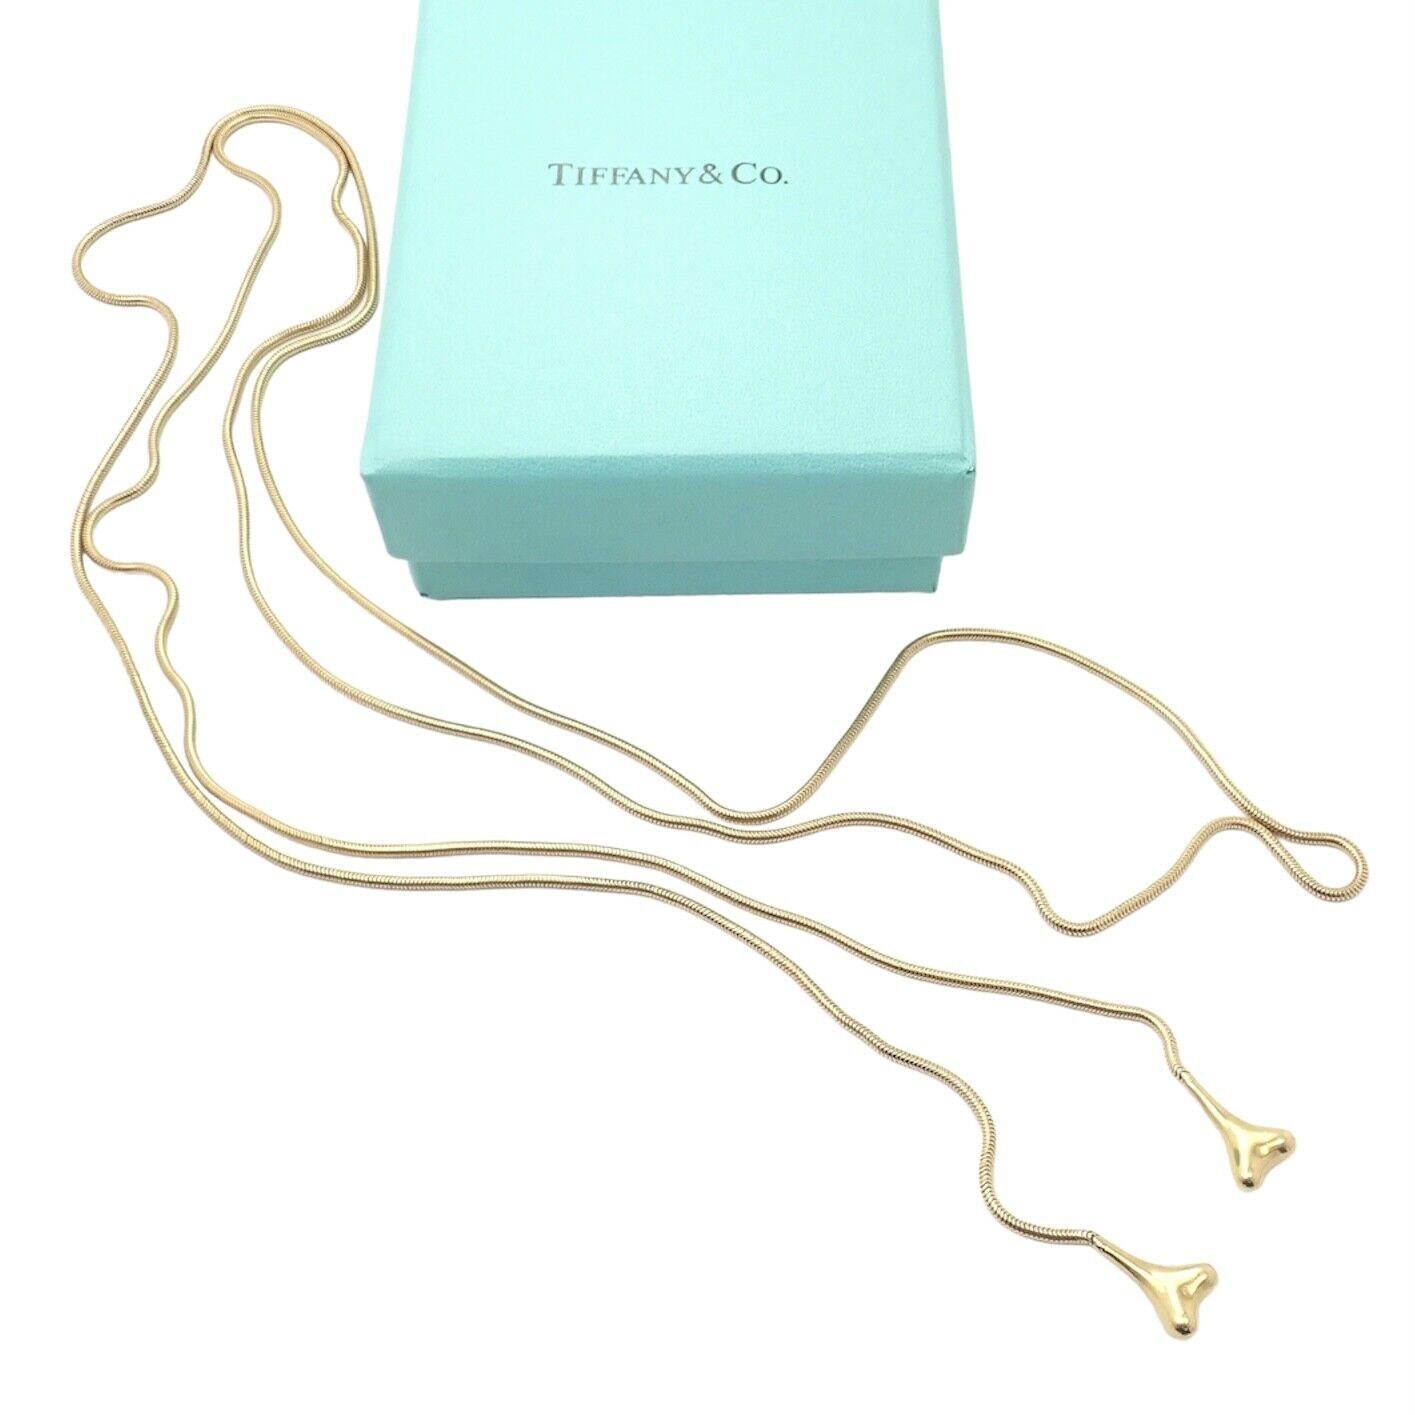 18k Yellow Gold Extra Long Necklace by Tiffany & Co.
Details:
Length: 49